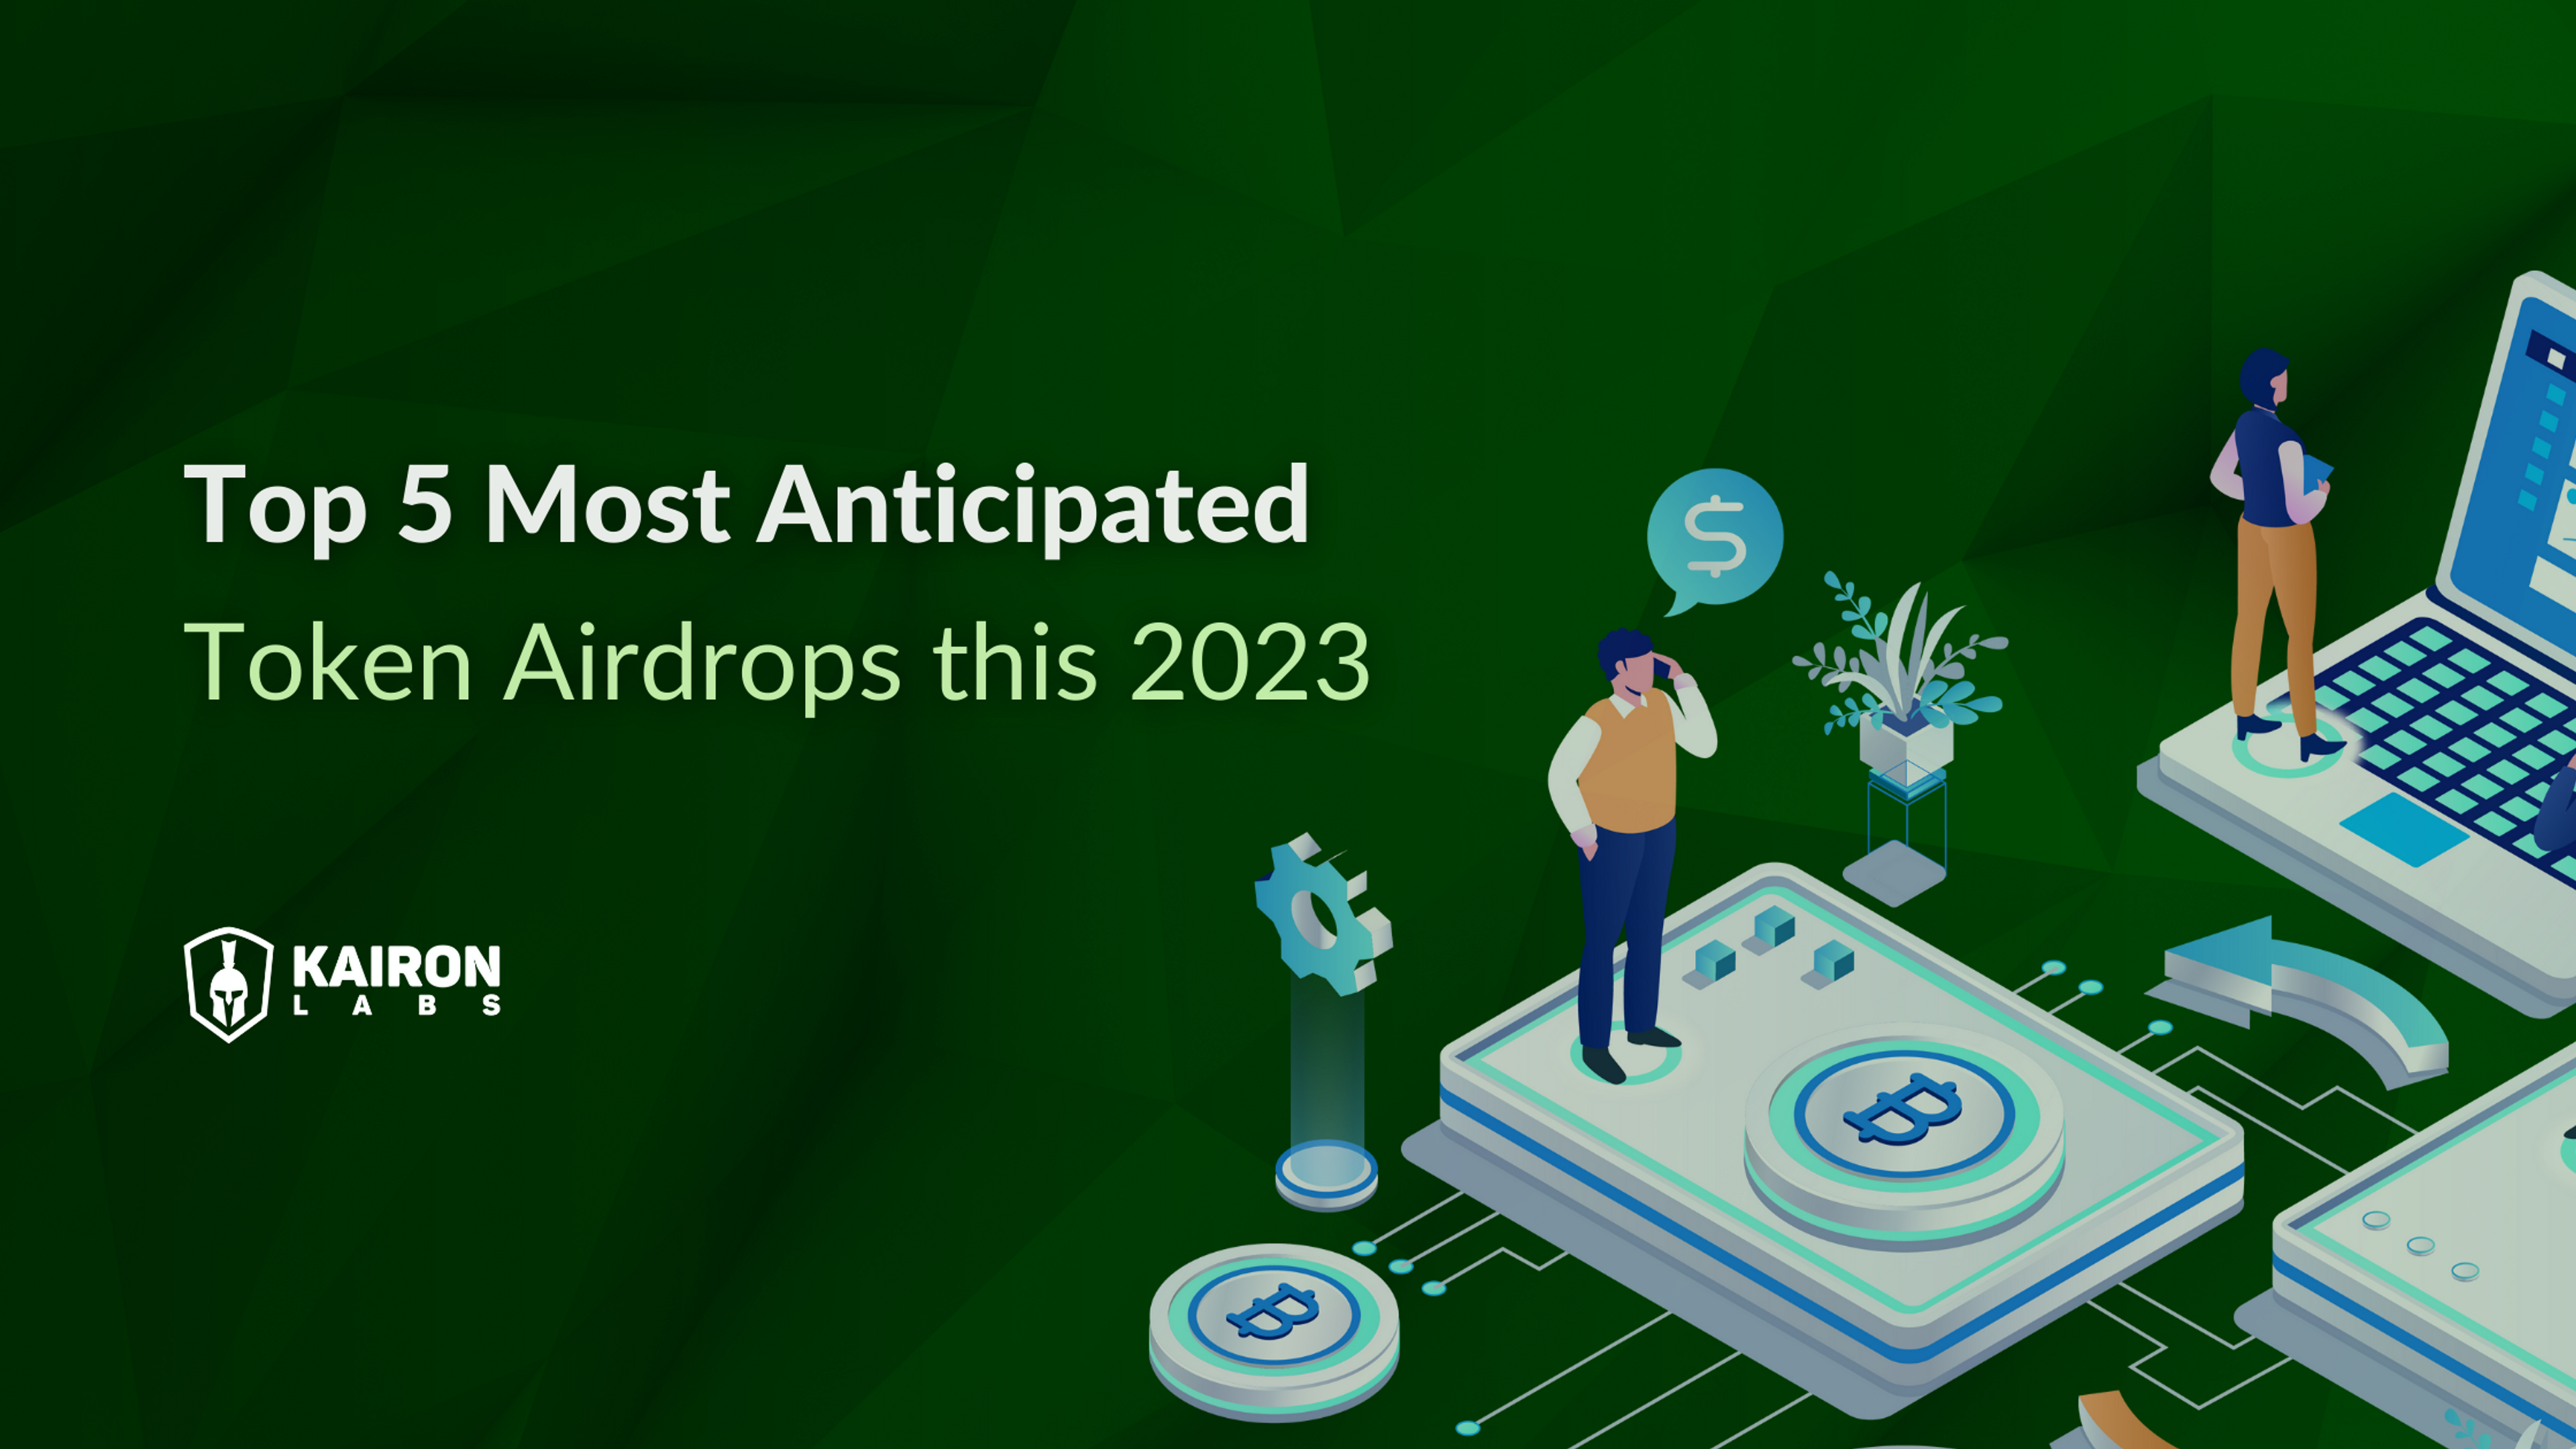 Top 5 Most Anticipated Token Airdrops this 2023 | Kairon labs